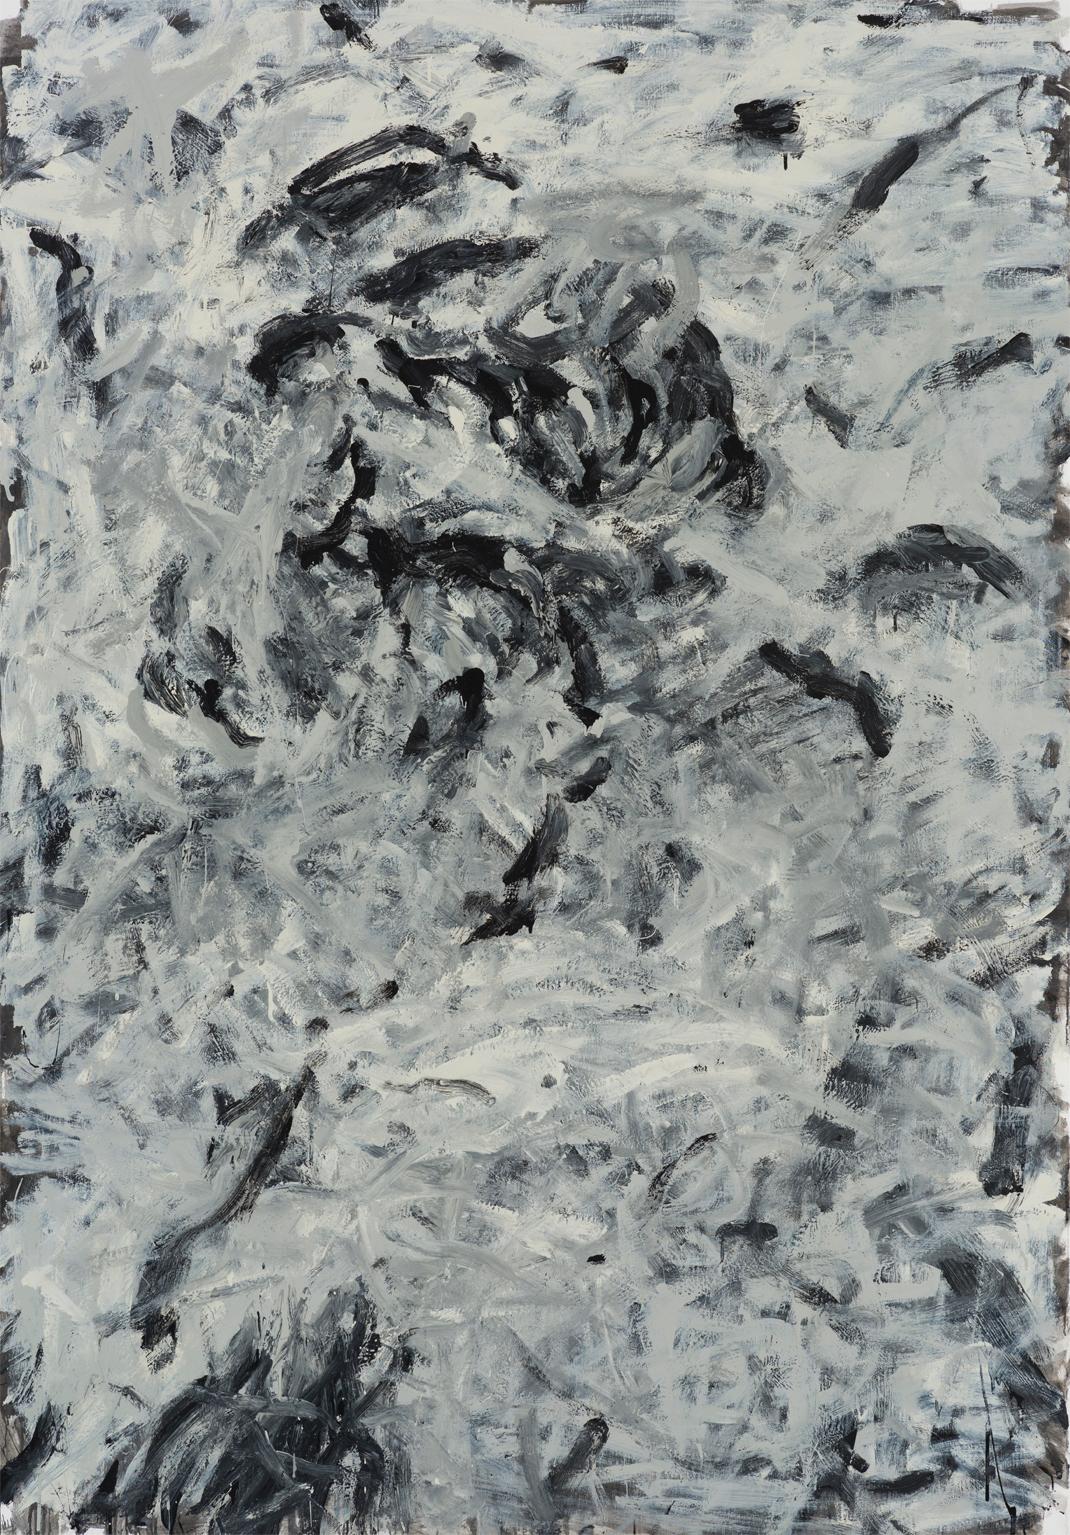 Untitled 08 [Remains of the Remains 08] - Abstract Painting, Black, White